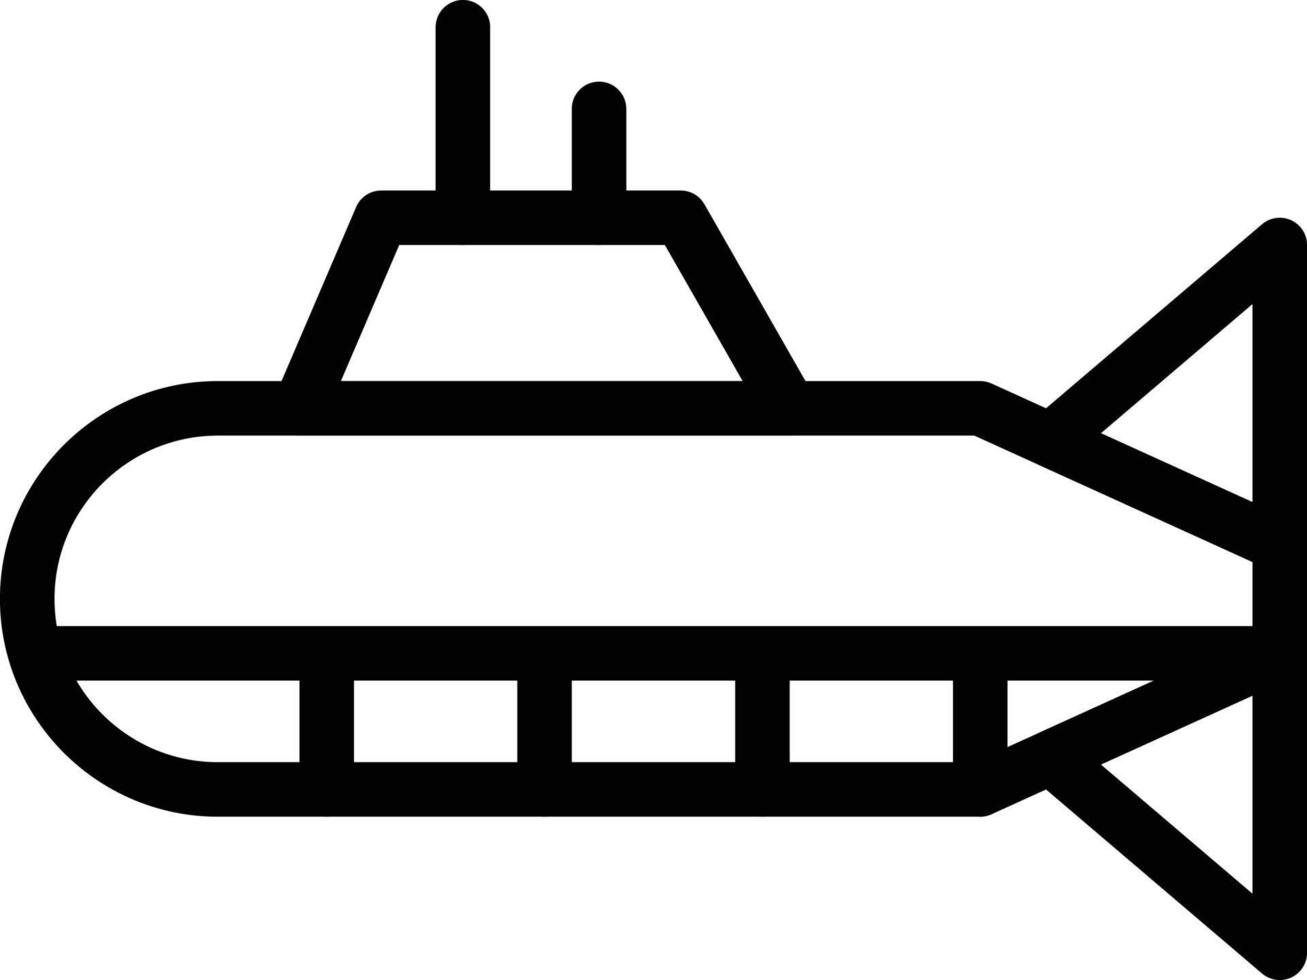 submarine vector illustration on a background.Premium quality symbols. vector icons for concept and graphic design.